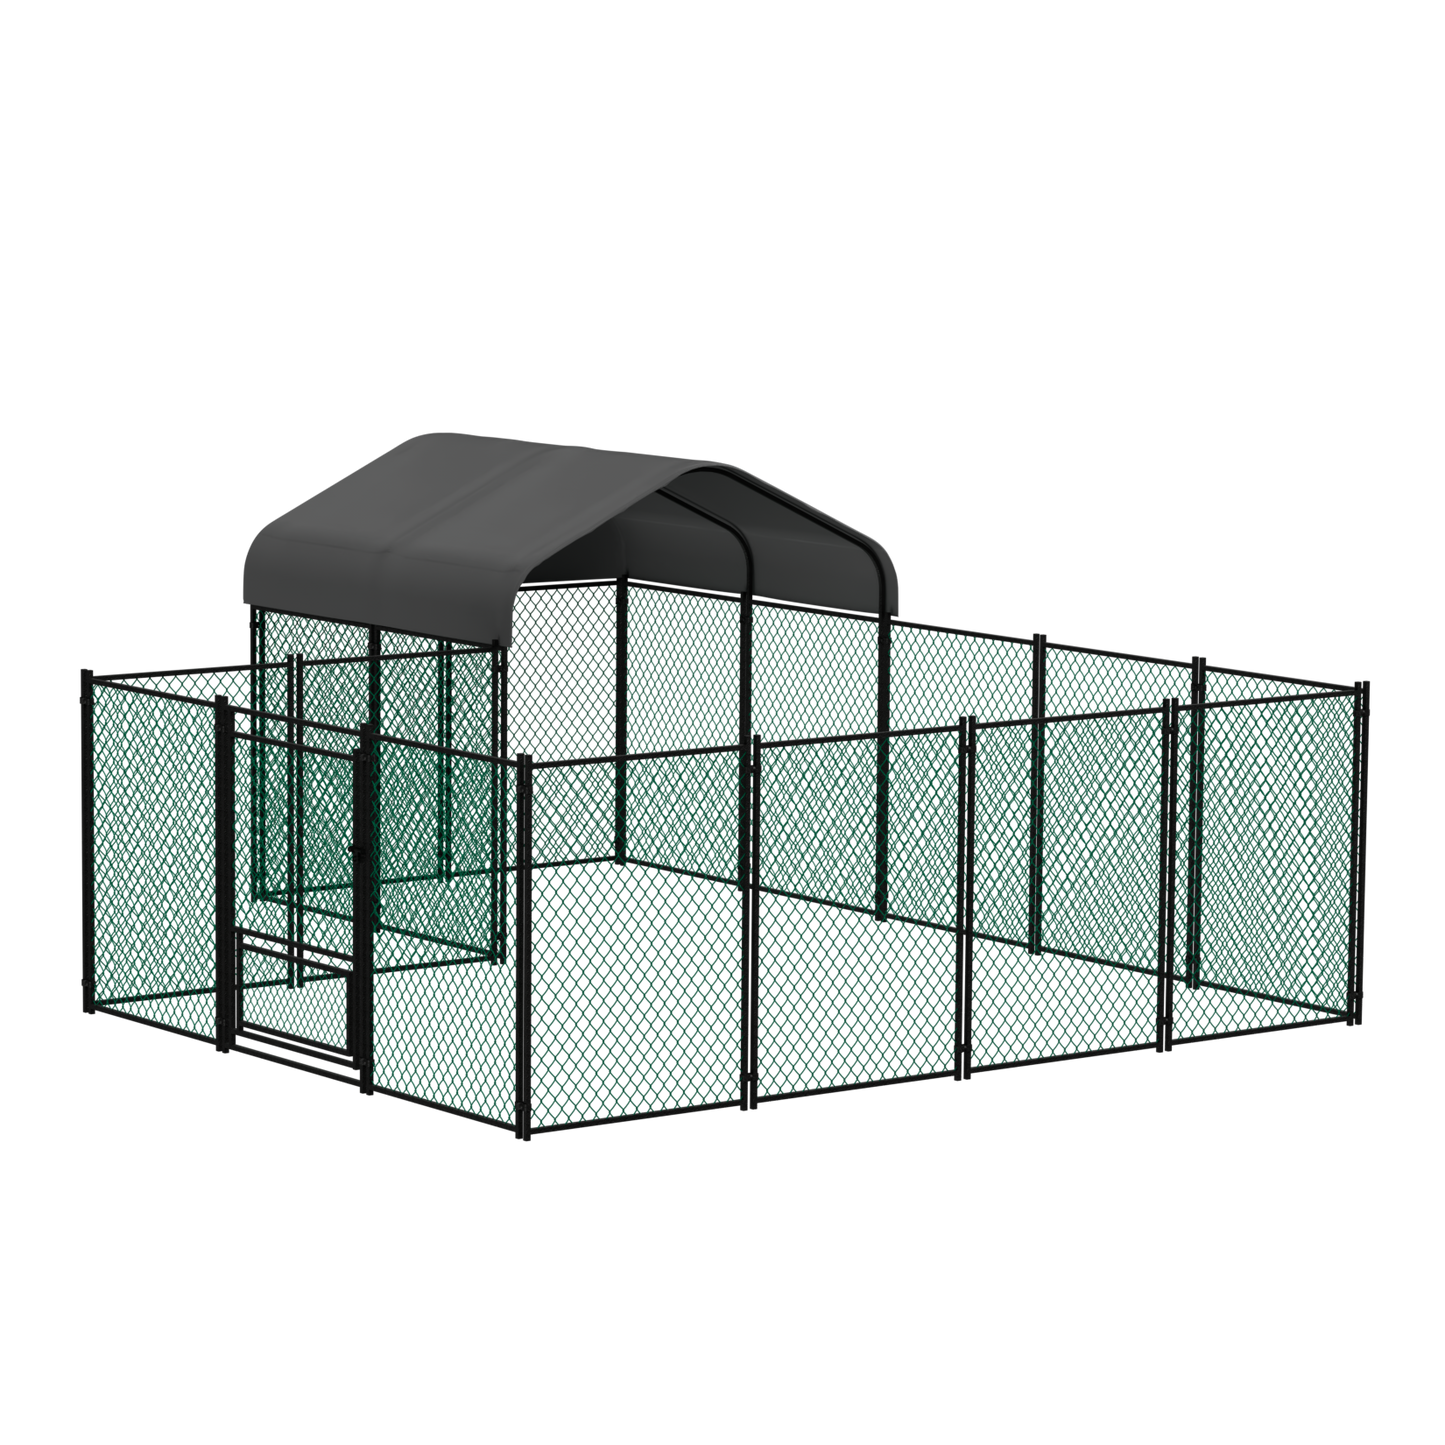 Walk-in Poultry Chicken Coop,Duck Goose Fence with Waterproof and UV Cover,Large Metal Hen House for Outdoor,Farm 12.9x10.2x5.1ft